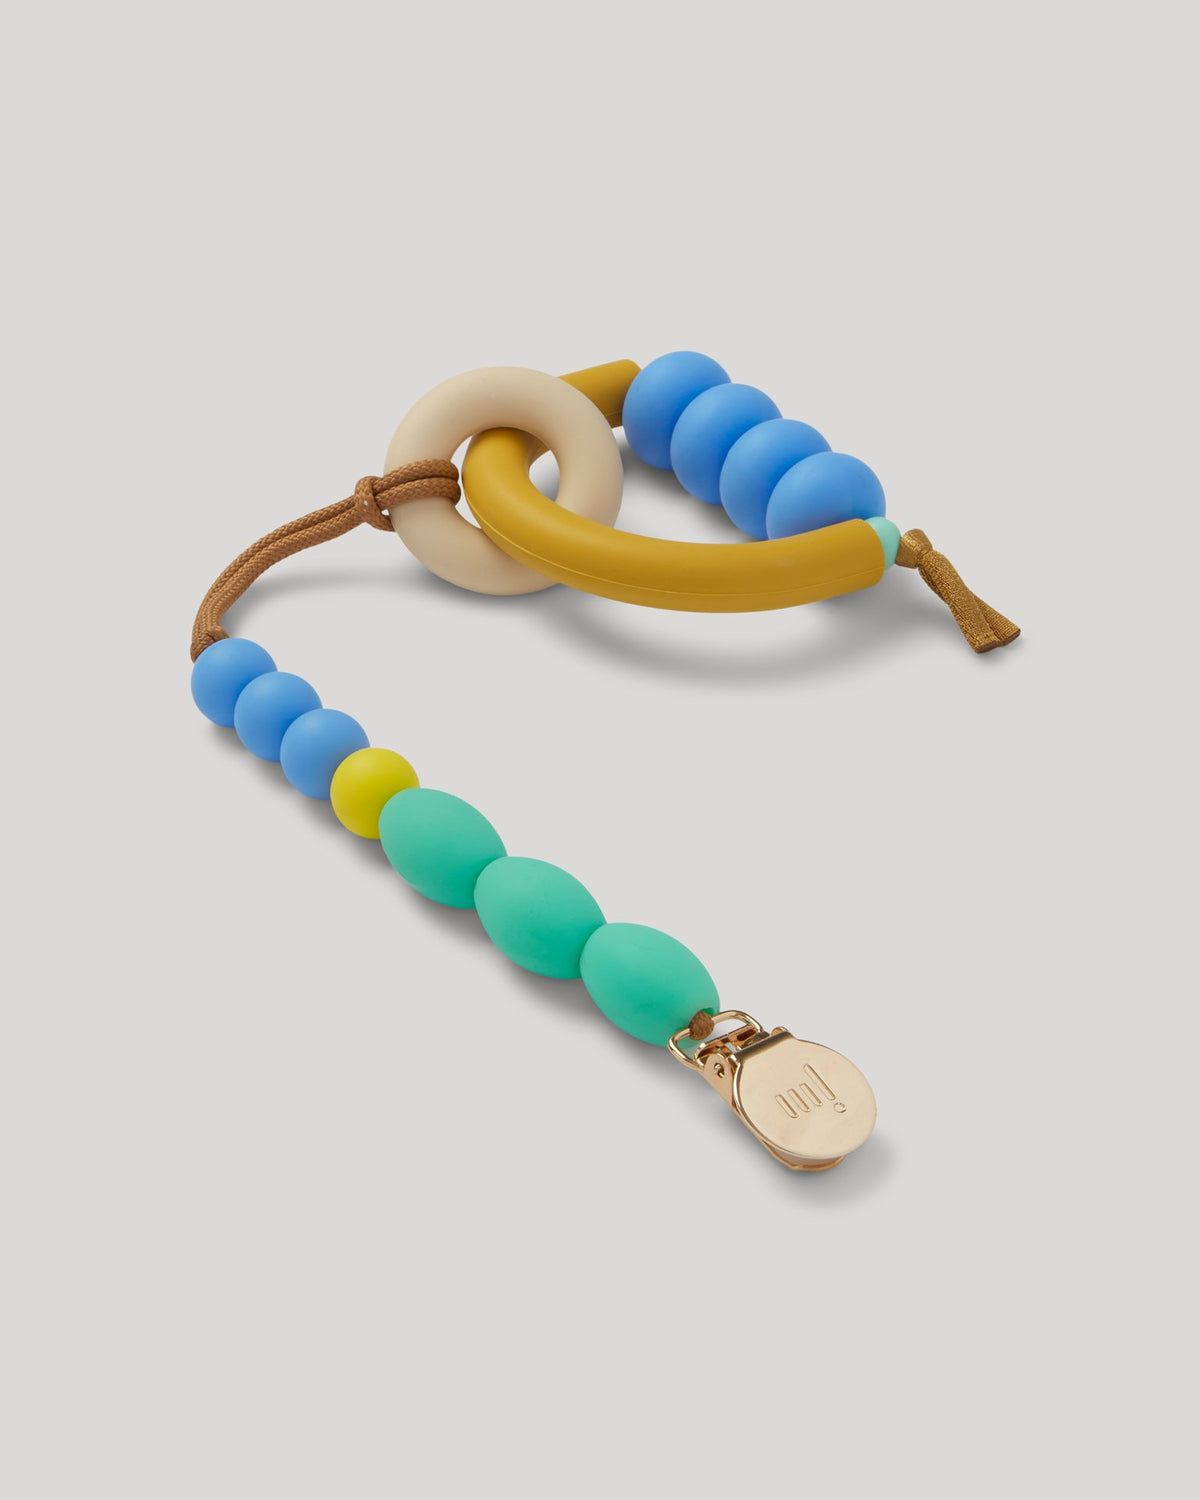 January Moon Teether + Clip Set - Assorted Styles